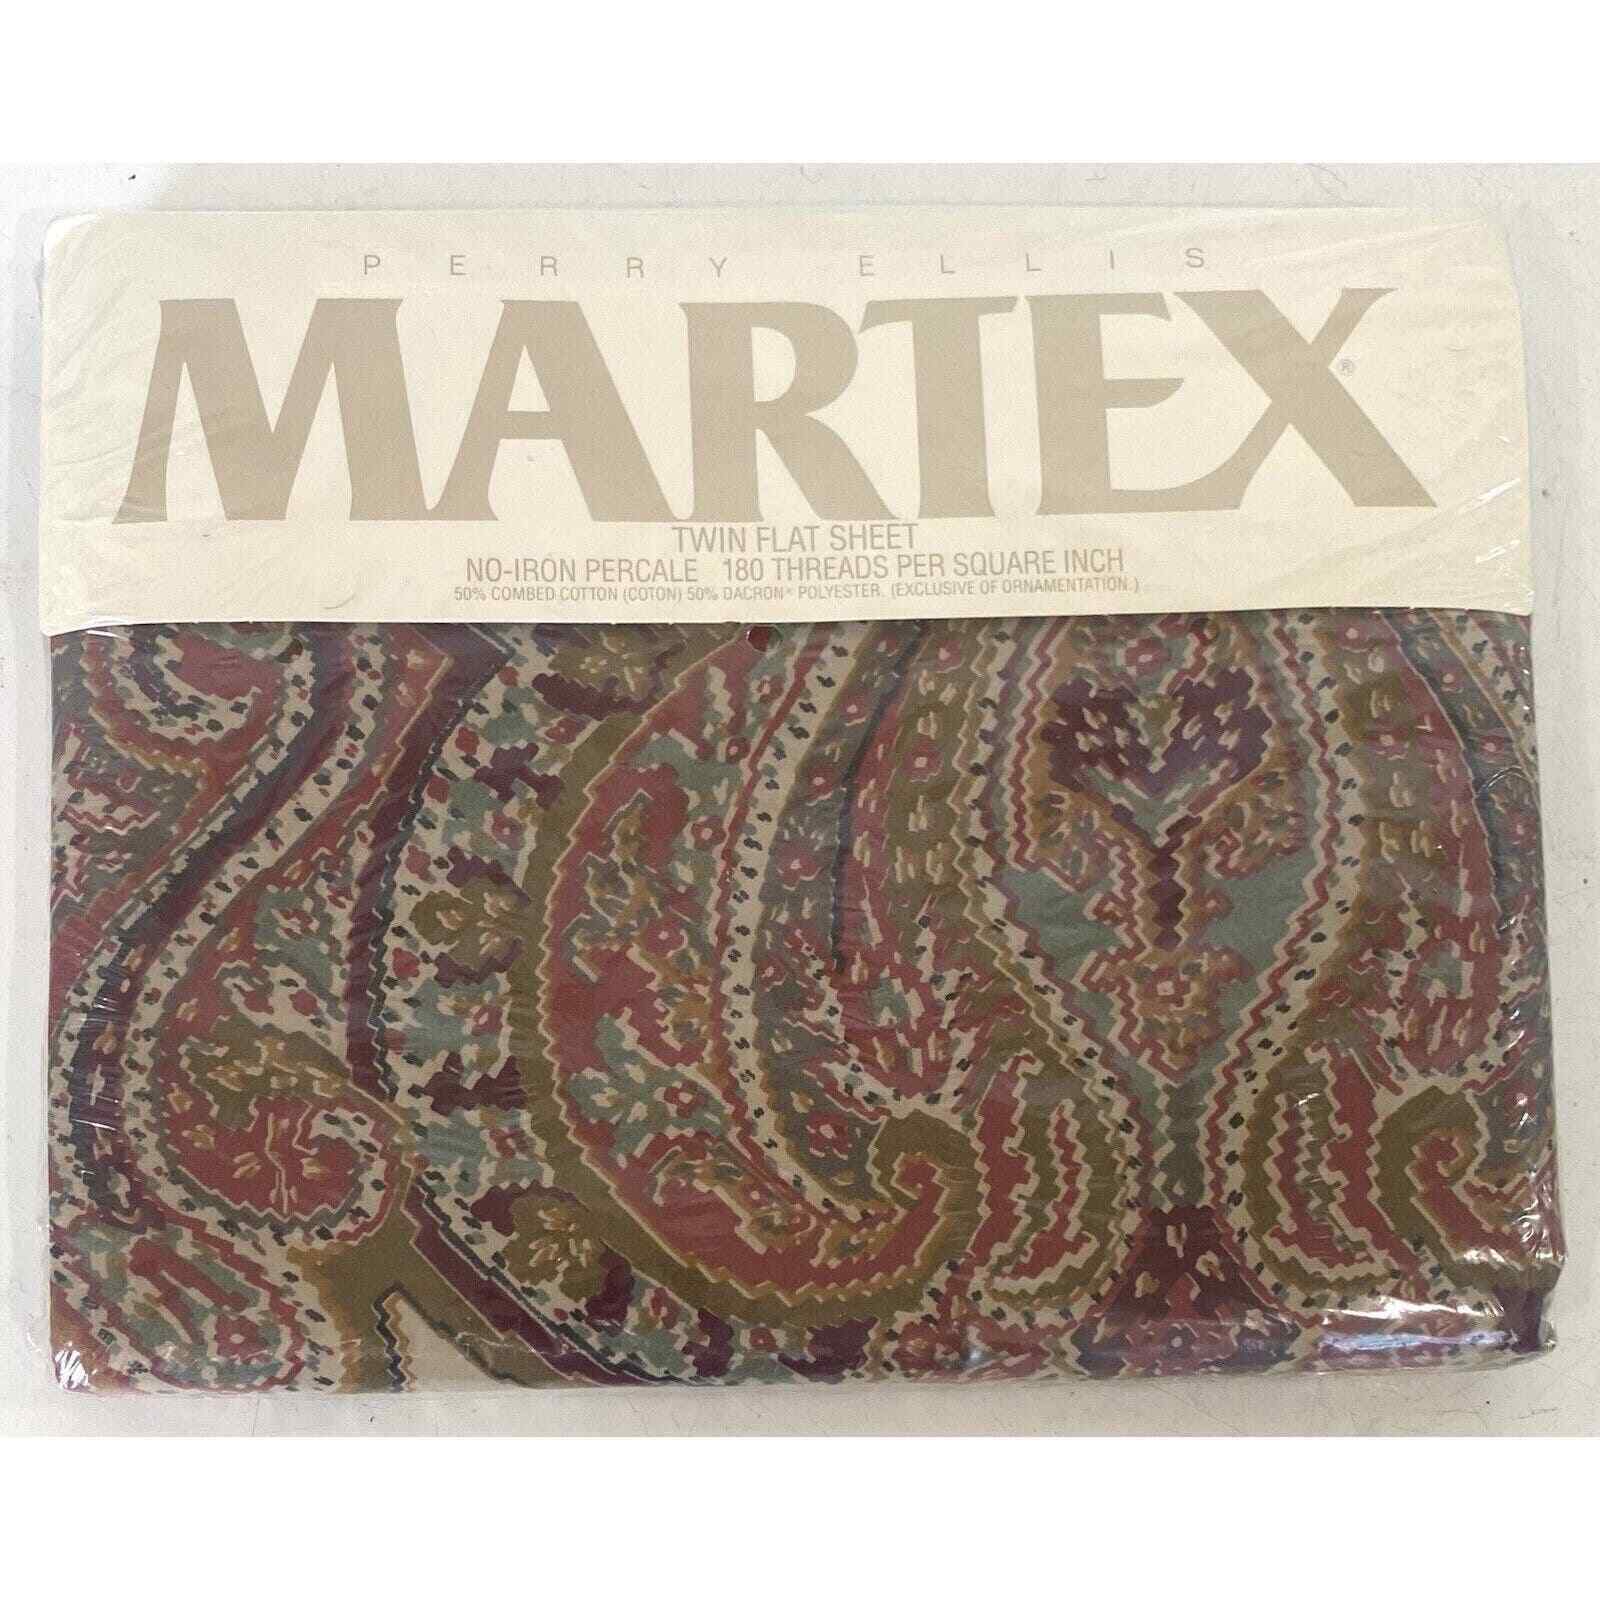 Vintage Perry Ellis Martex Twin Flat Sheet Paisley Shawl New In Package